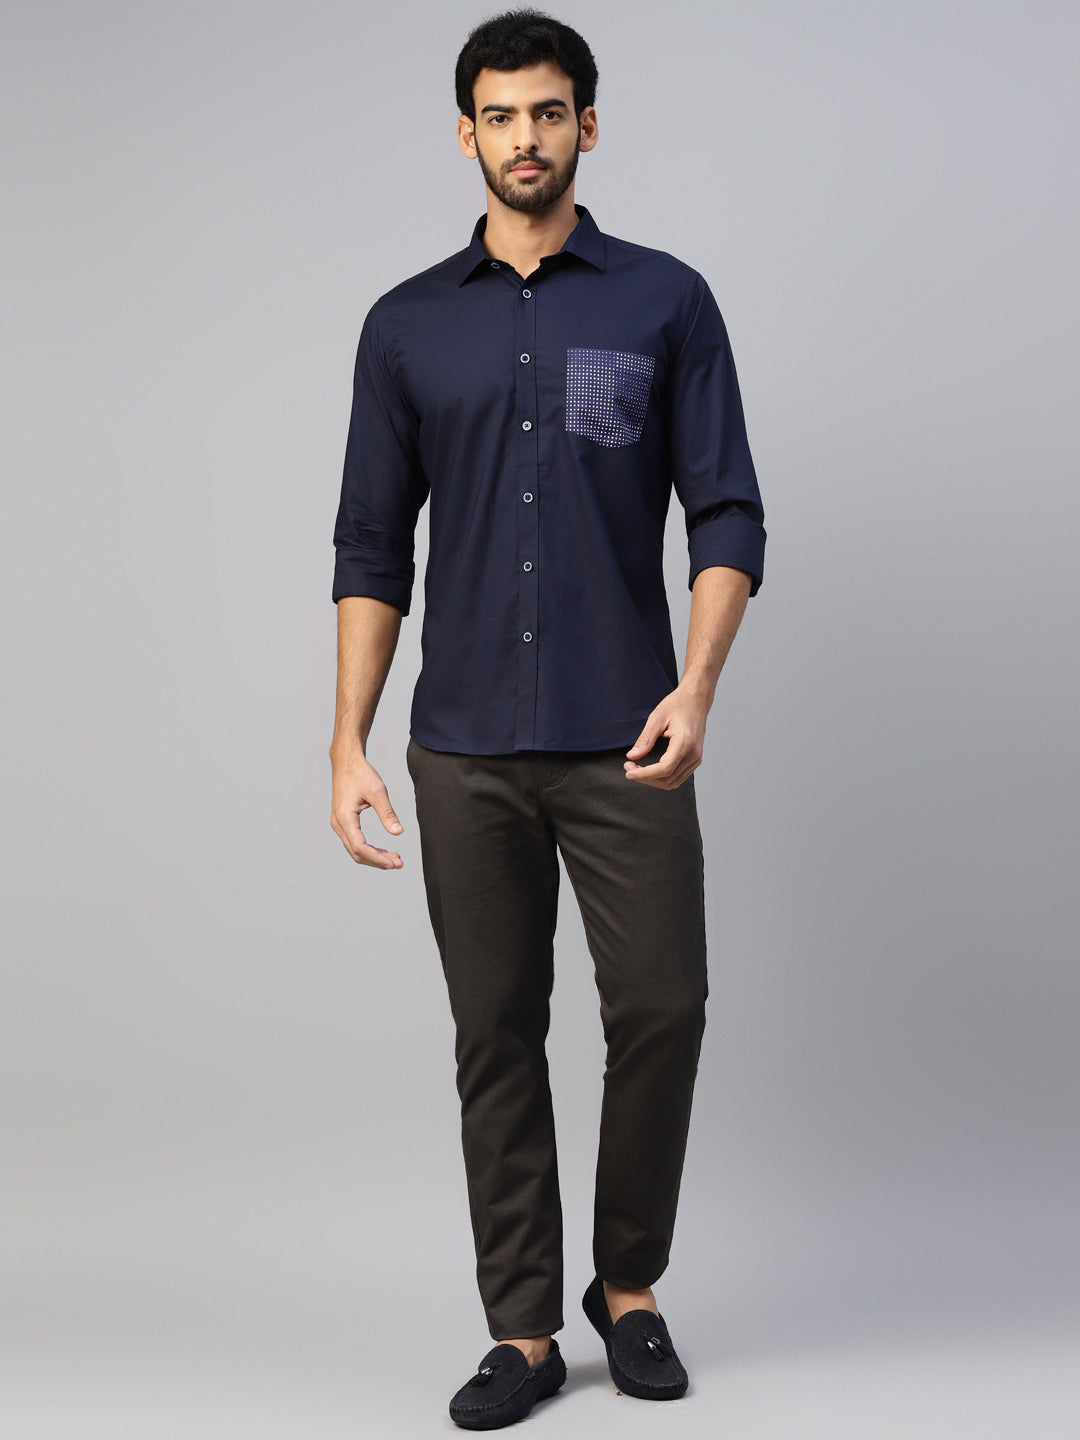 Don Vino Men's Slim Fit Navy Blue Shirt With Contrast Pockets